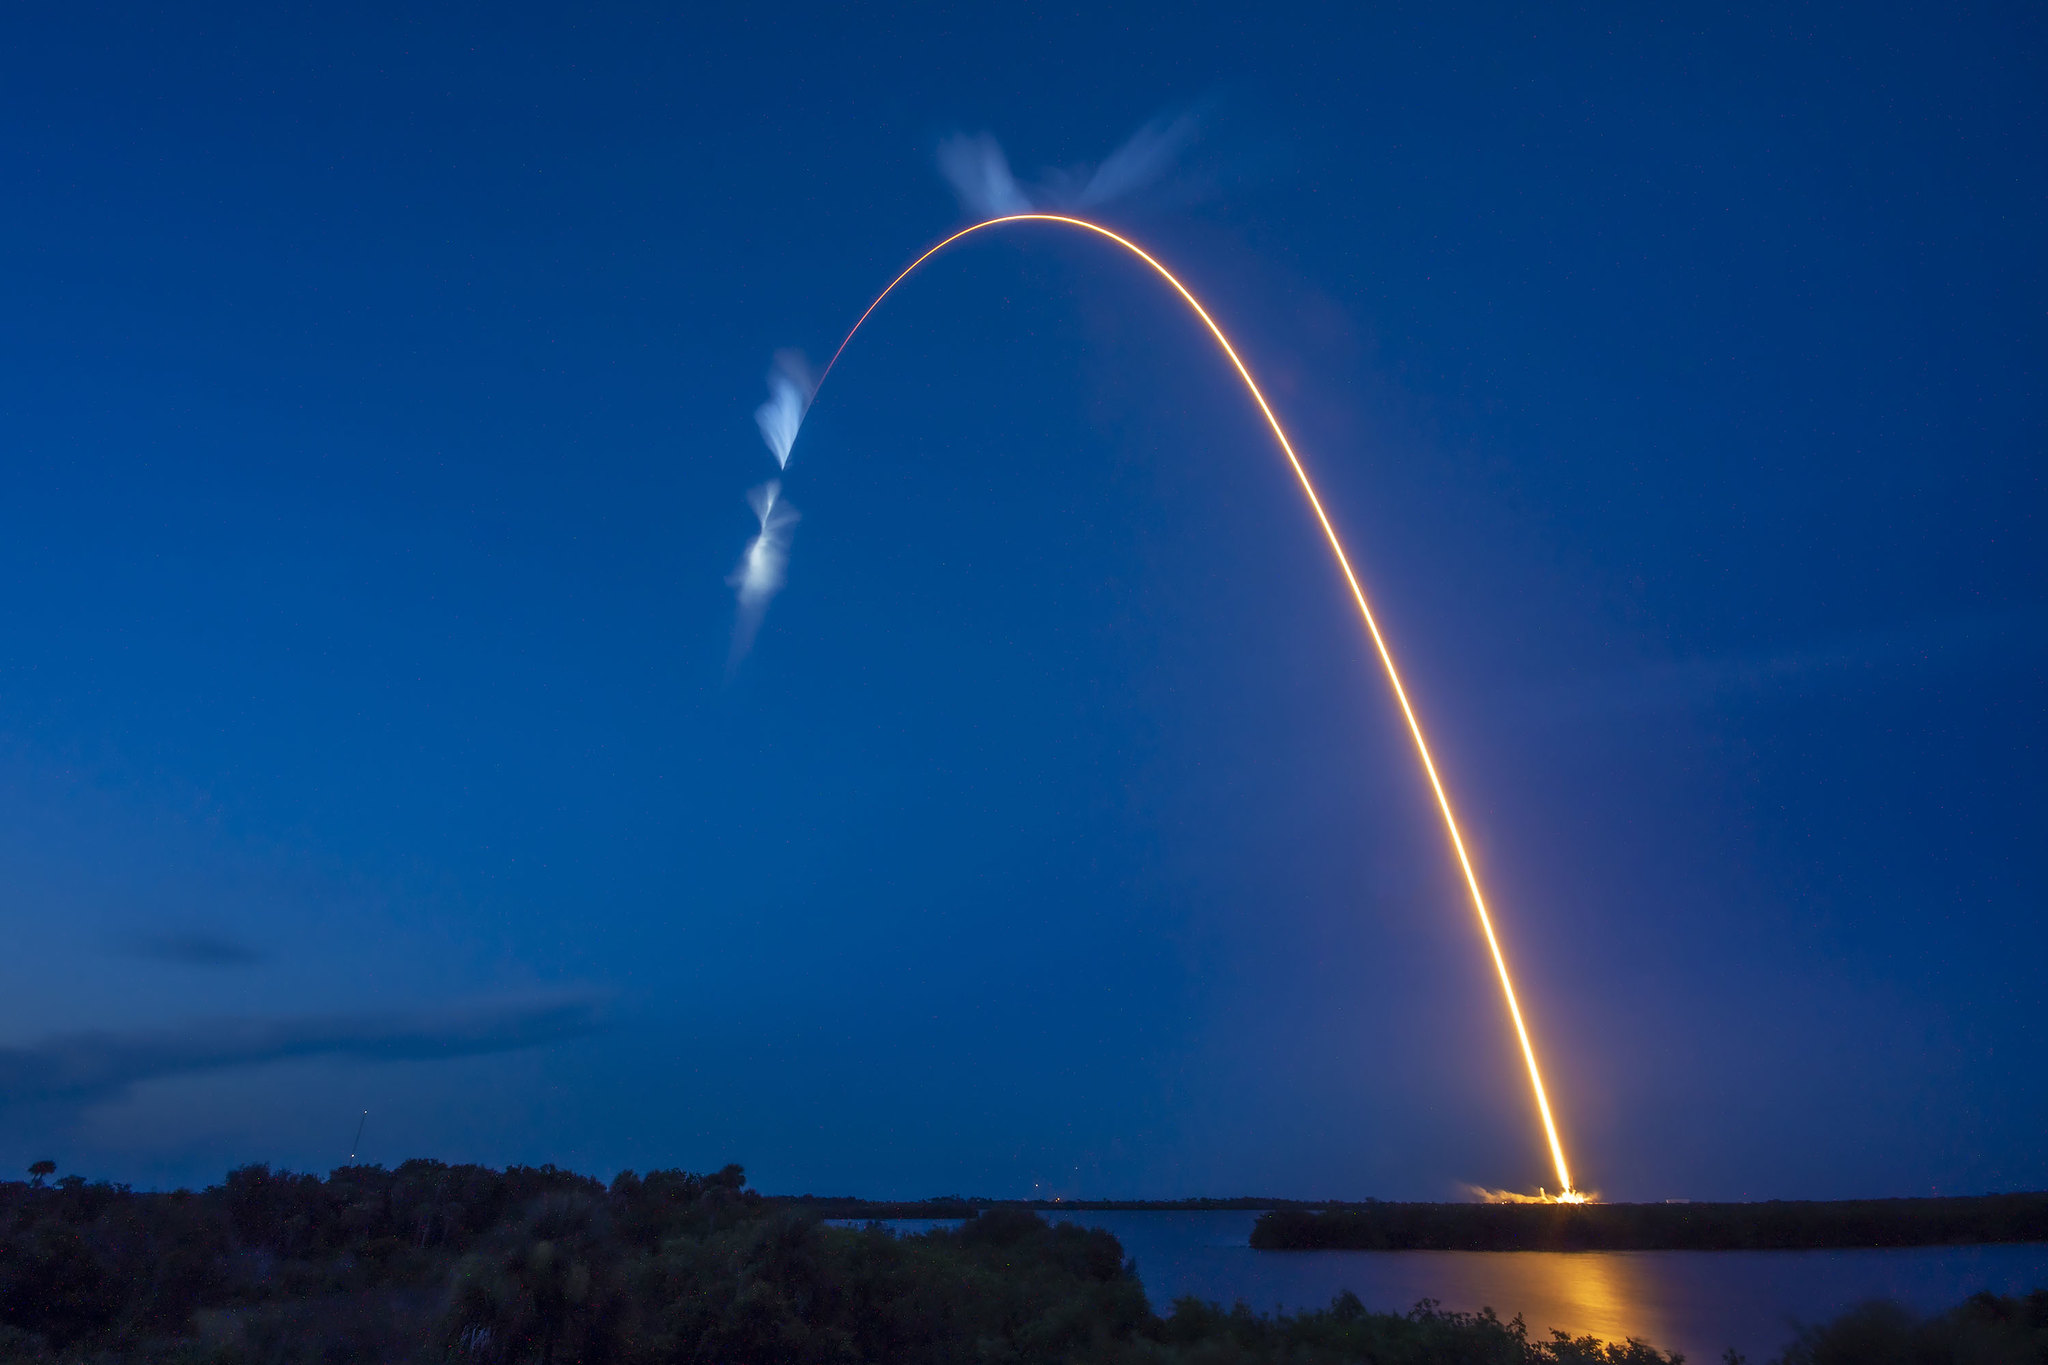 A bright white trail is in view after the SpaceX Falcon 9 rocket carrying the Dragon capsule lifts off from Launch Complex 39A at NASA’s Kennedy Space Center in Florida on July 14, 2022.